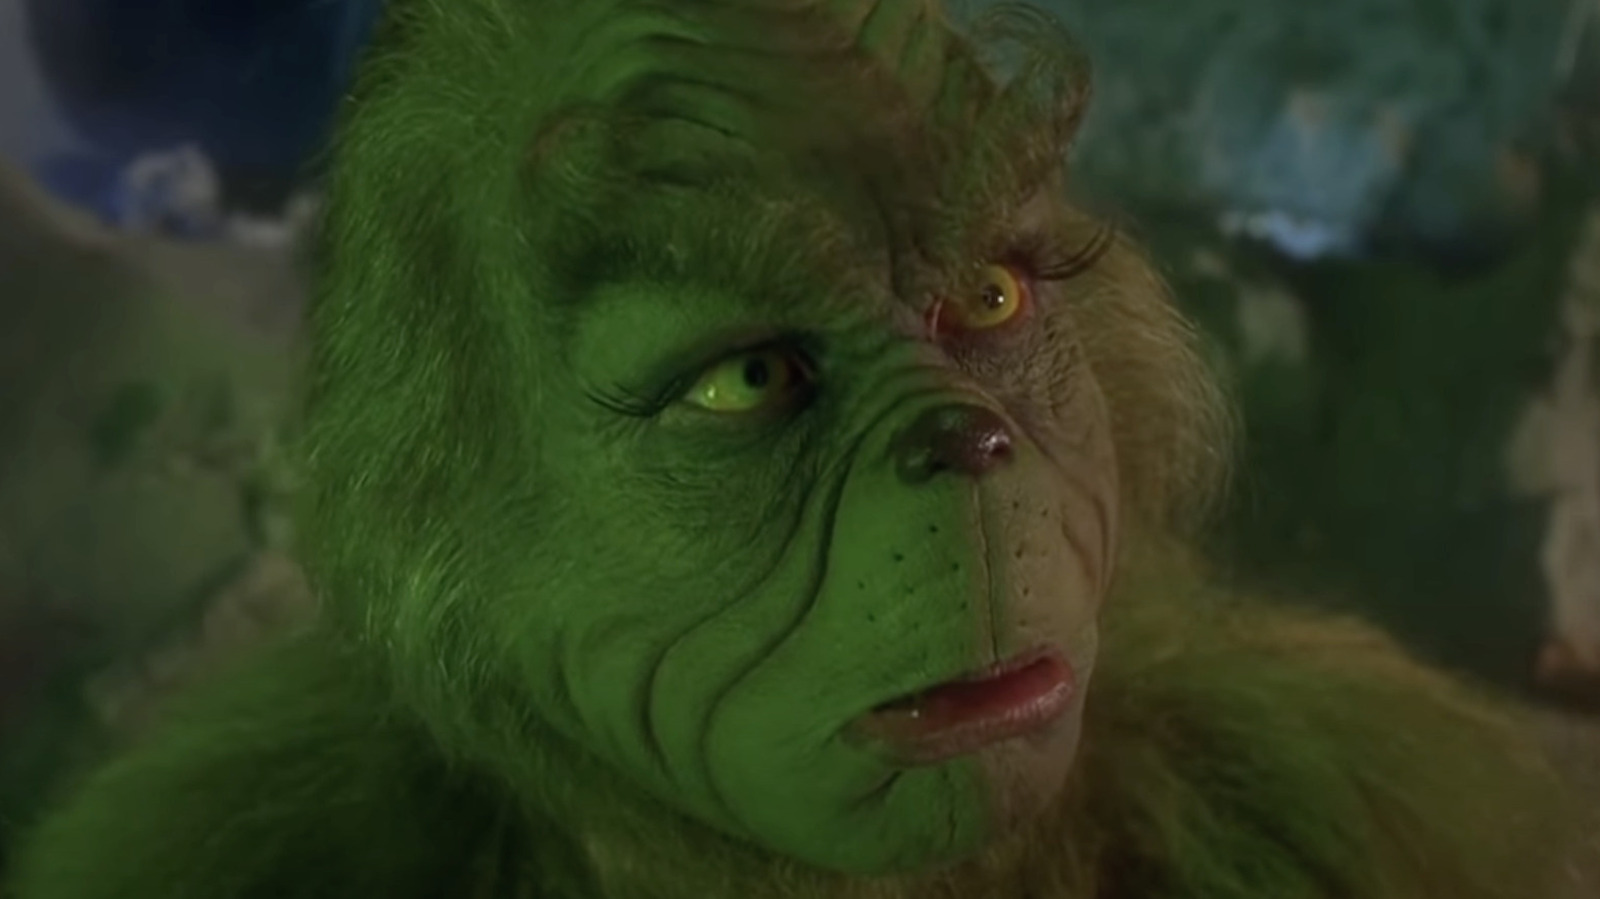 are the dog ears fake on the grinch